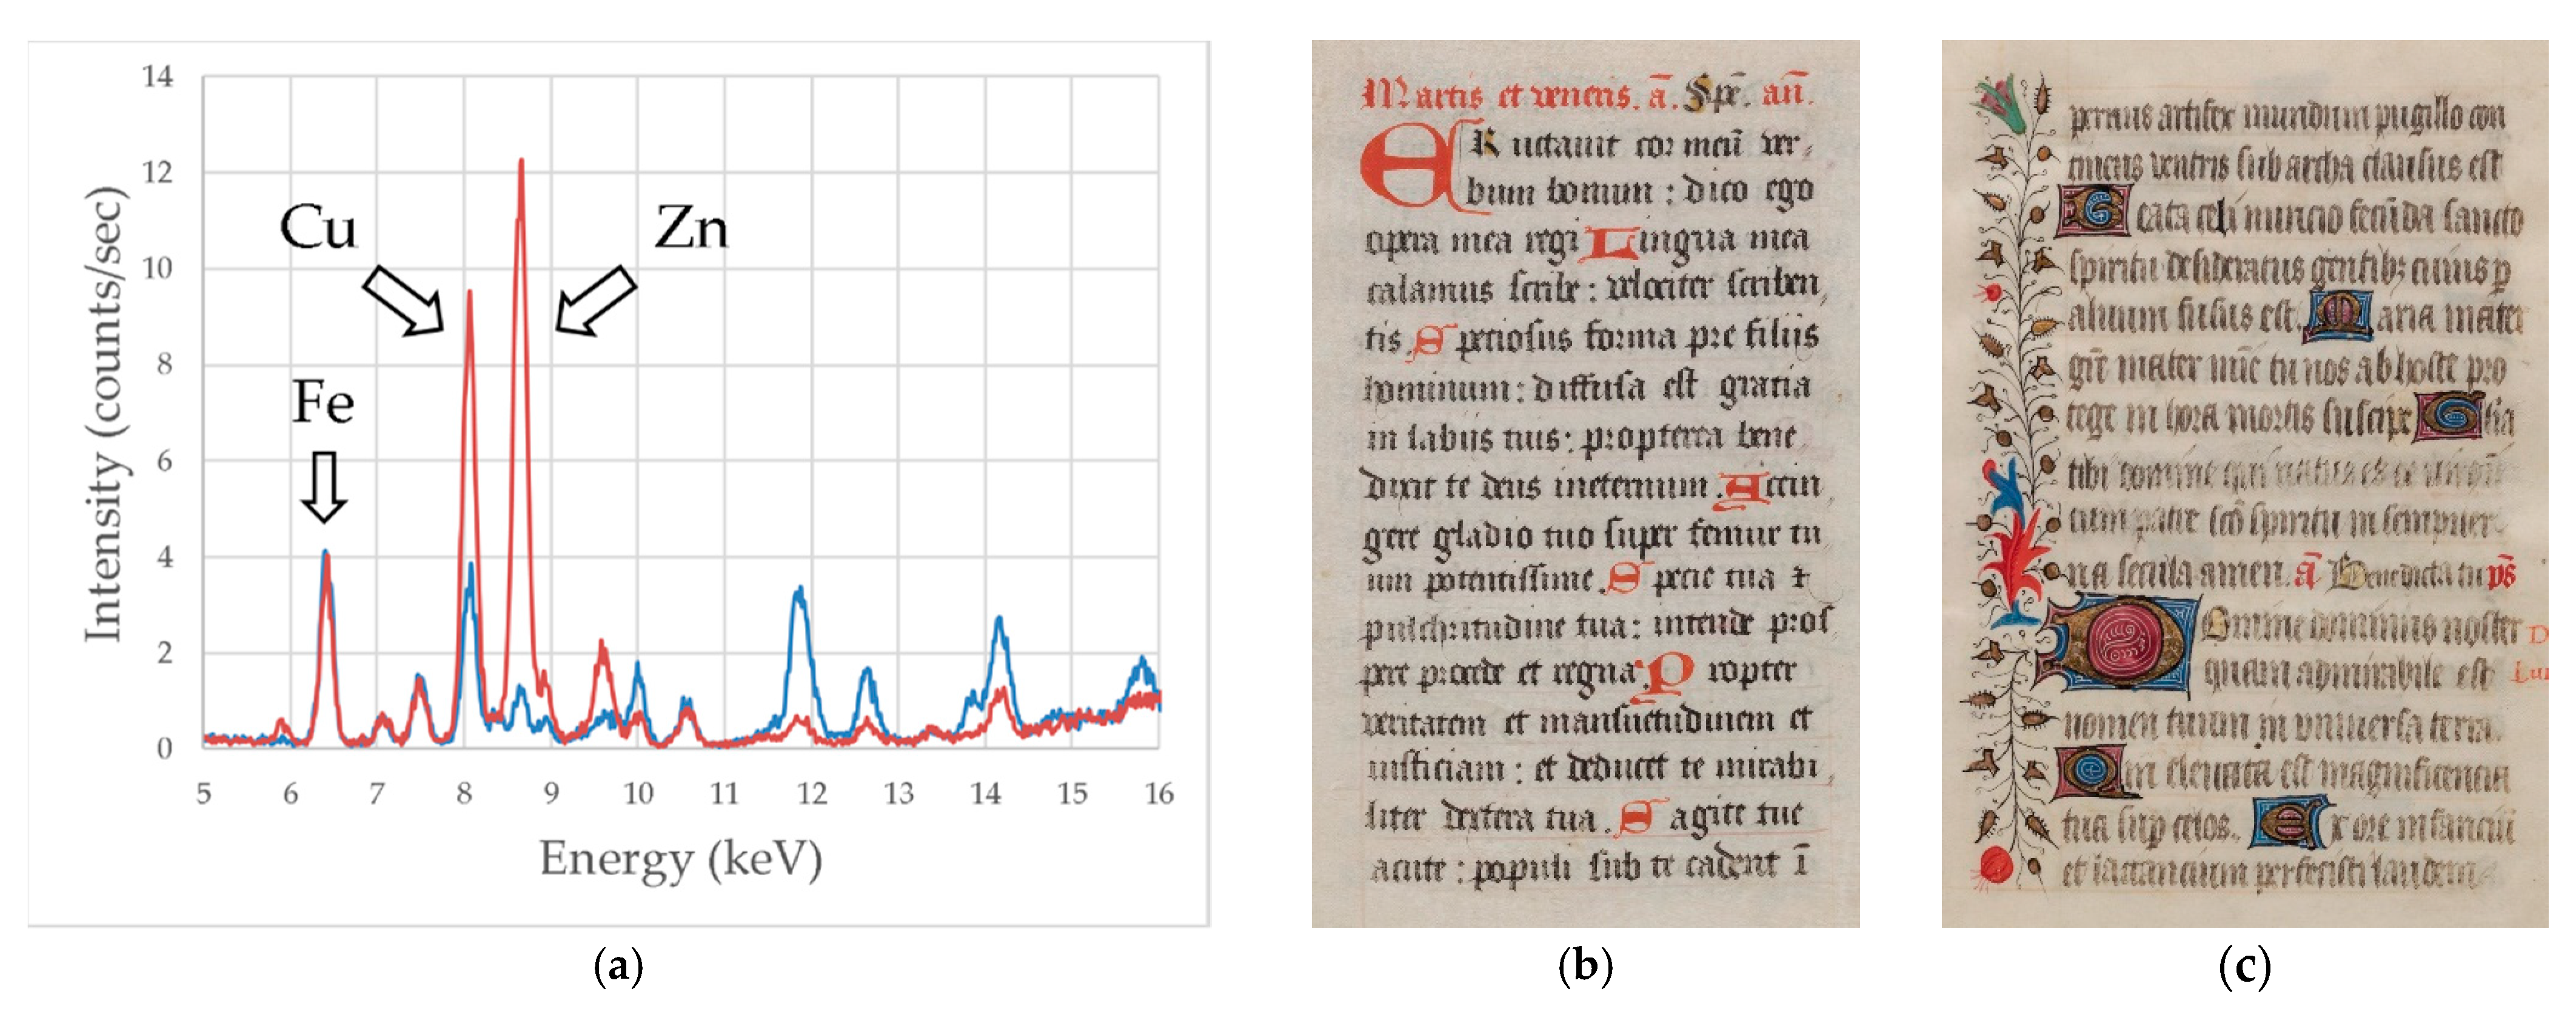 Heritage | Free Full-Text | On the Hierarchical Use of Colourants in a 15th  Century Book of Hours | HTML